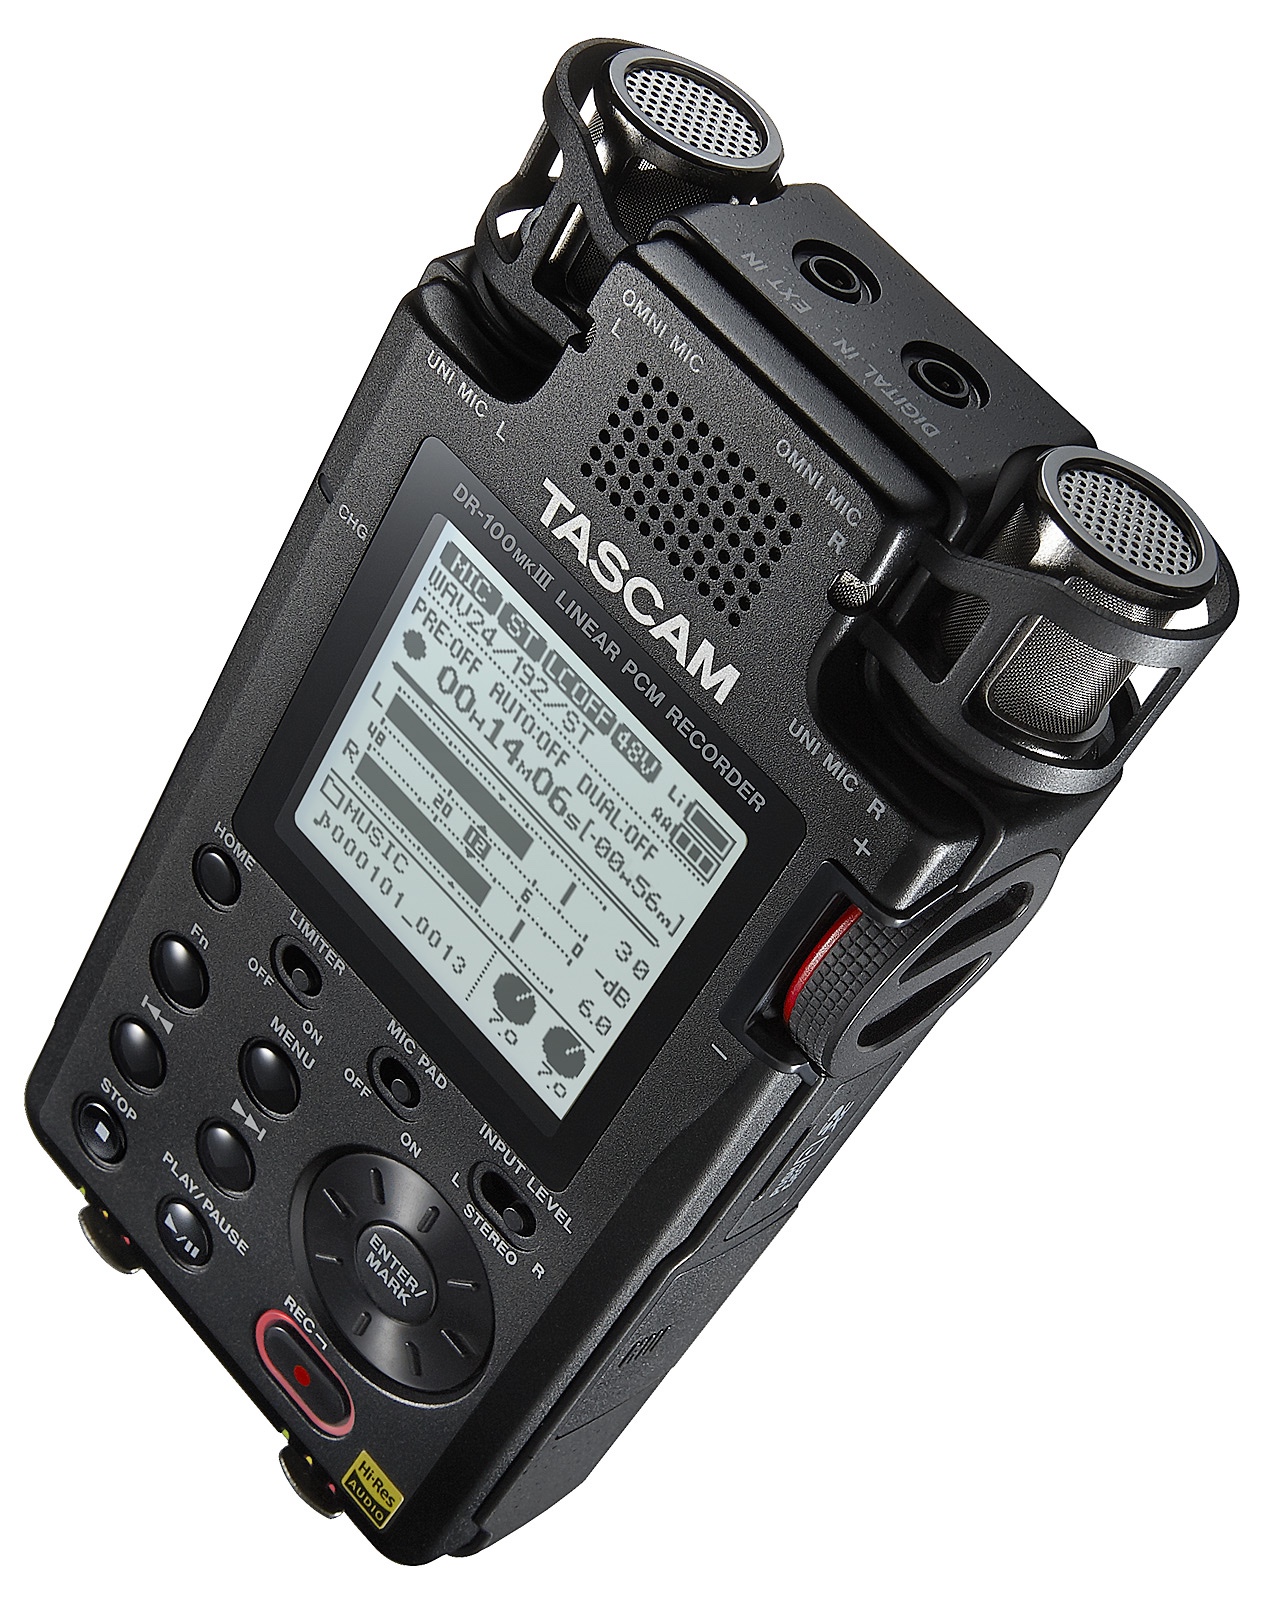 Tascam DR-100 Mk III Review – The Best Portable Recorder in the